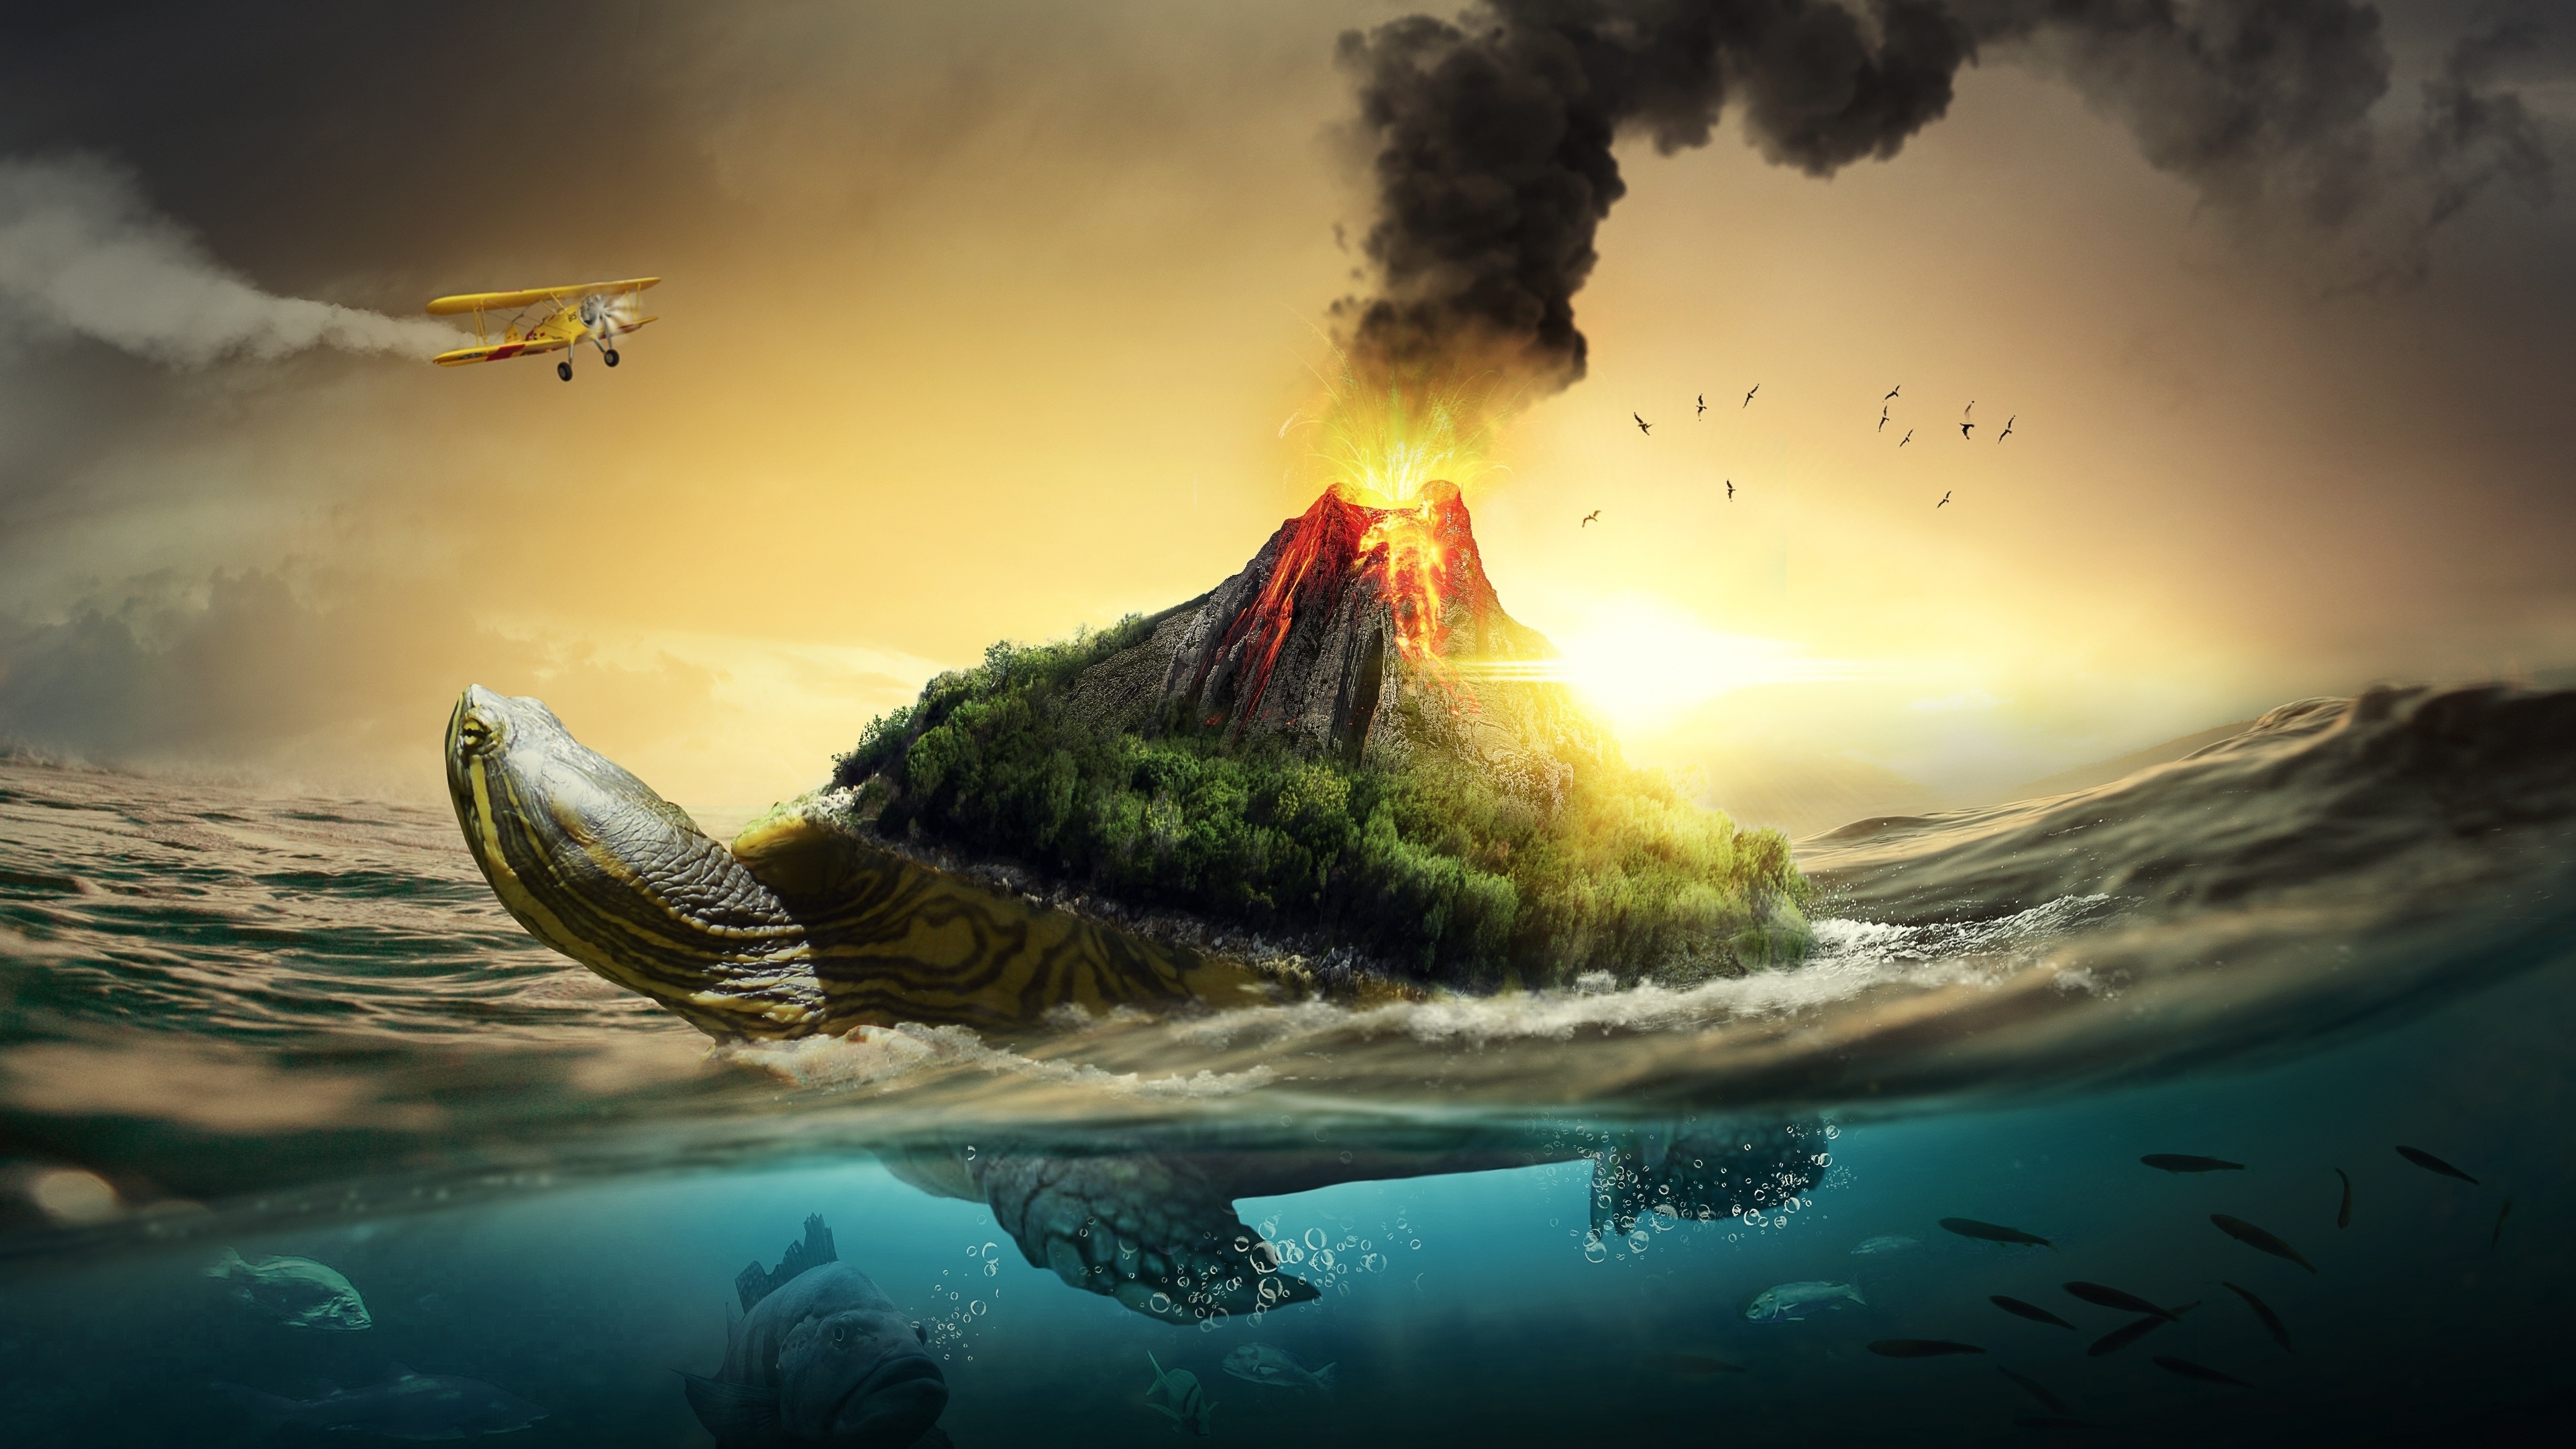 Wallpaper Airplane, Fishes, Volcano On Turtle, Underwater, Aircraft:3840x2160